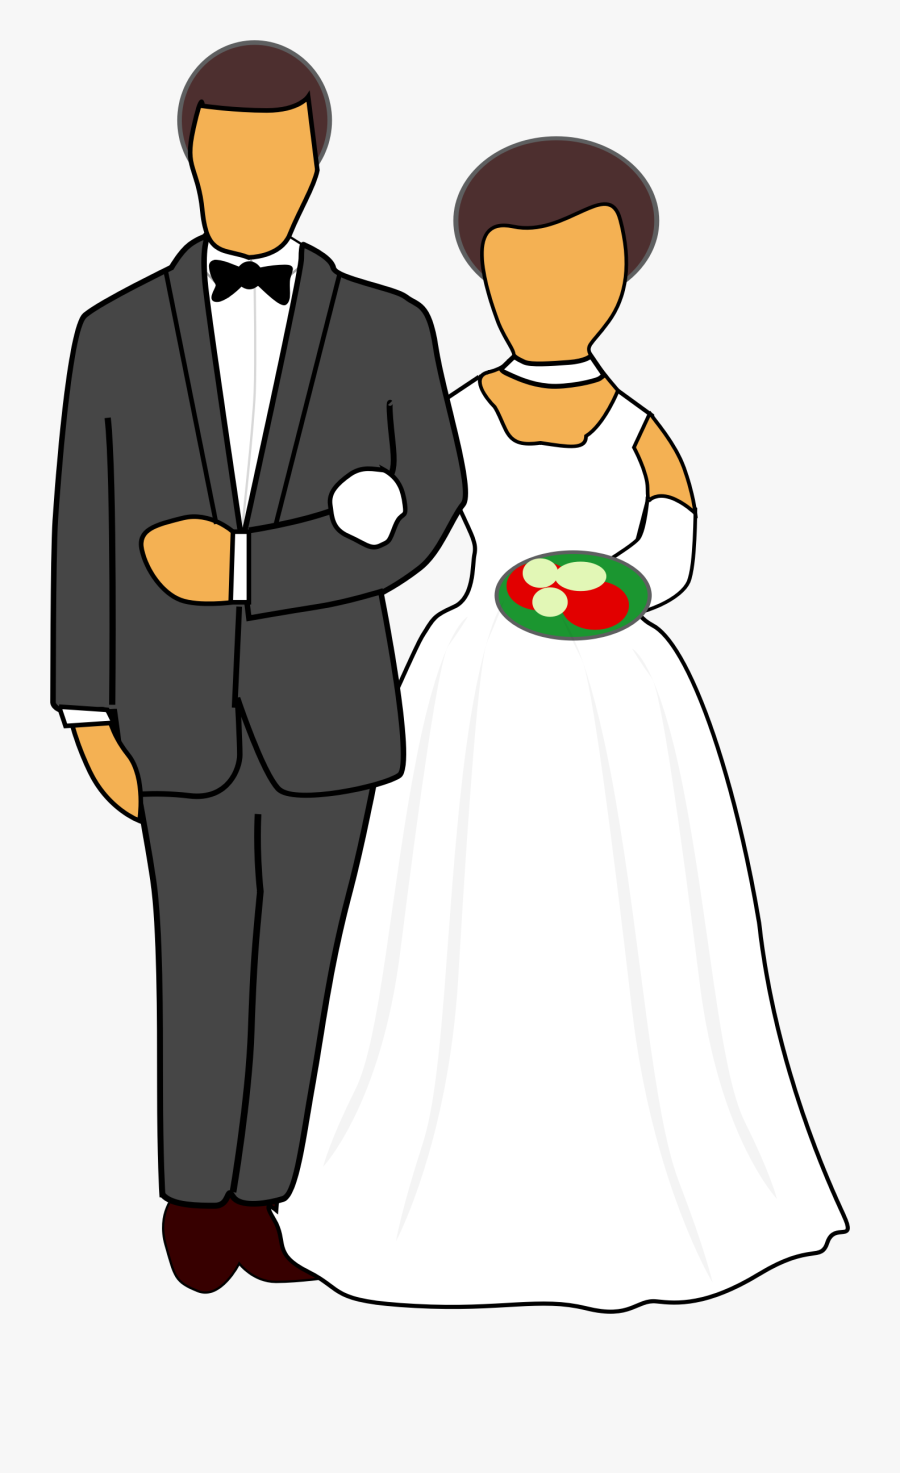 httpsviewTxmTowedding clipart woman married people getting married clipart